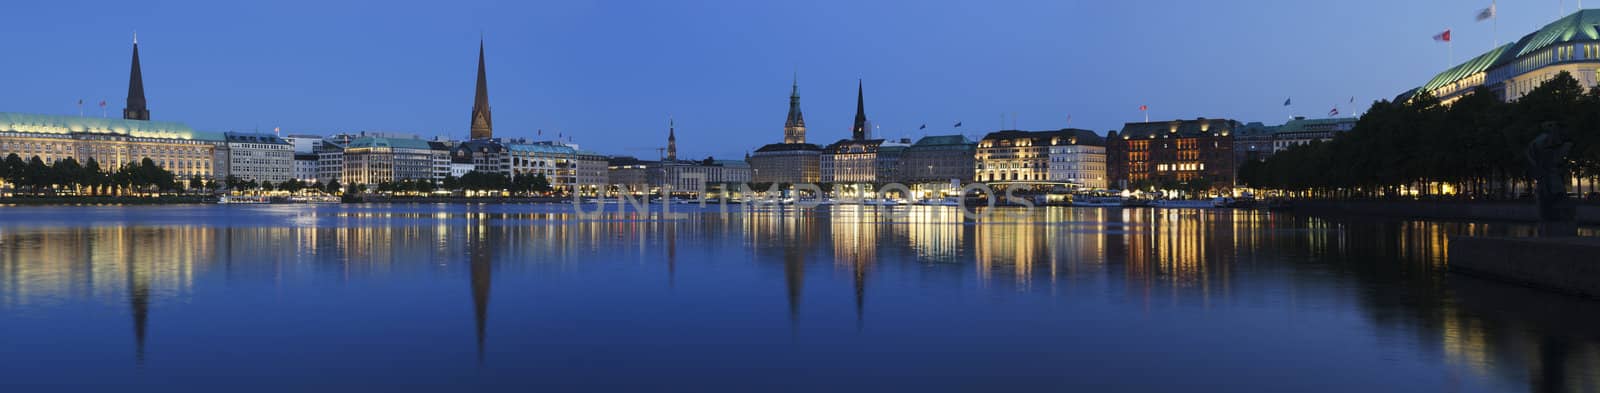 Panorama picture of the Binnenalster in Hamburg at the blue hour. The dark trees on the right side keep the viewers attention focused on the center of the picture.